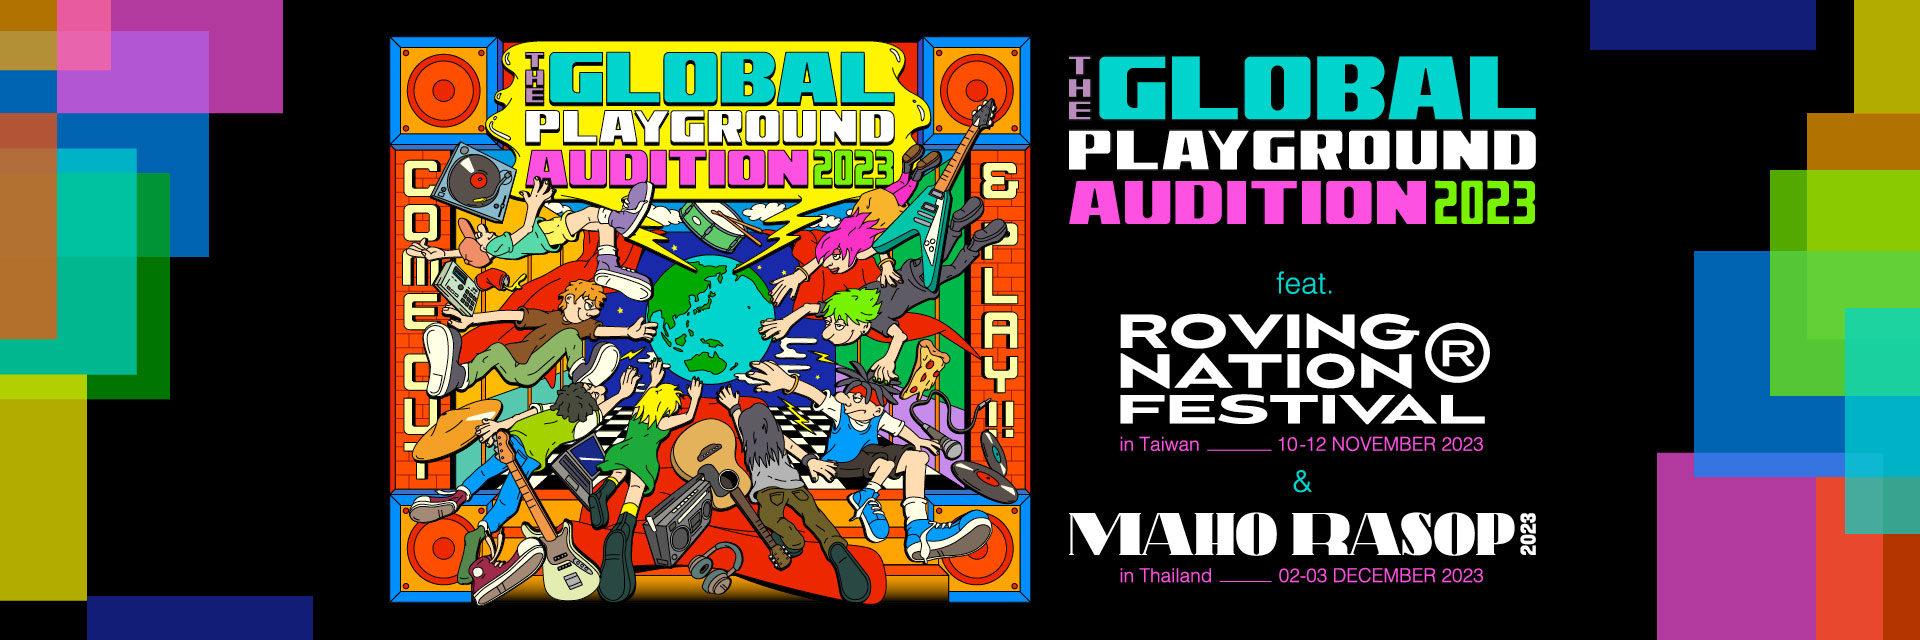 The Global Playground Audition 2023 PCバナー